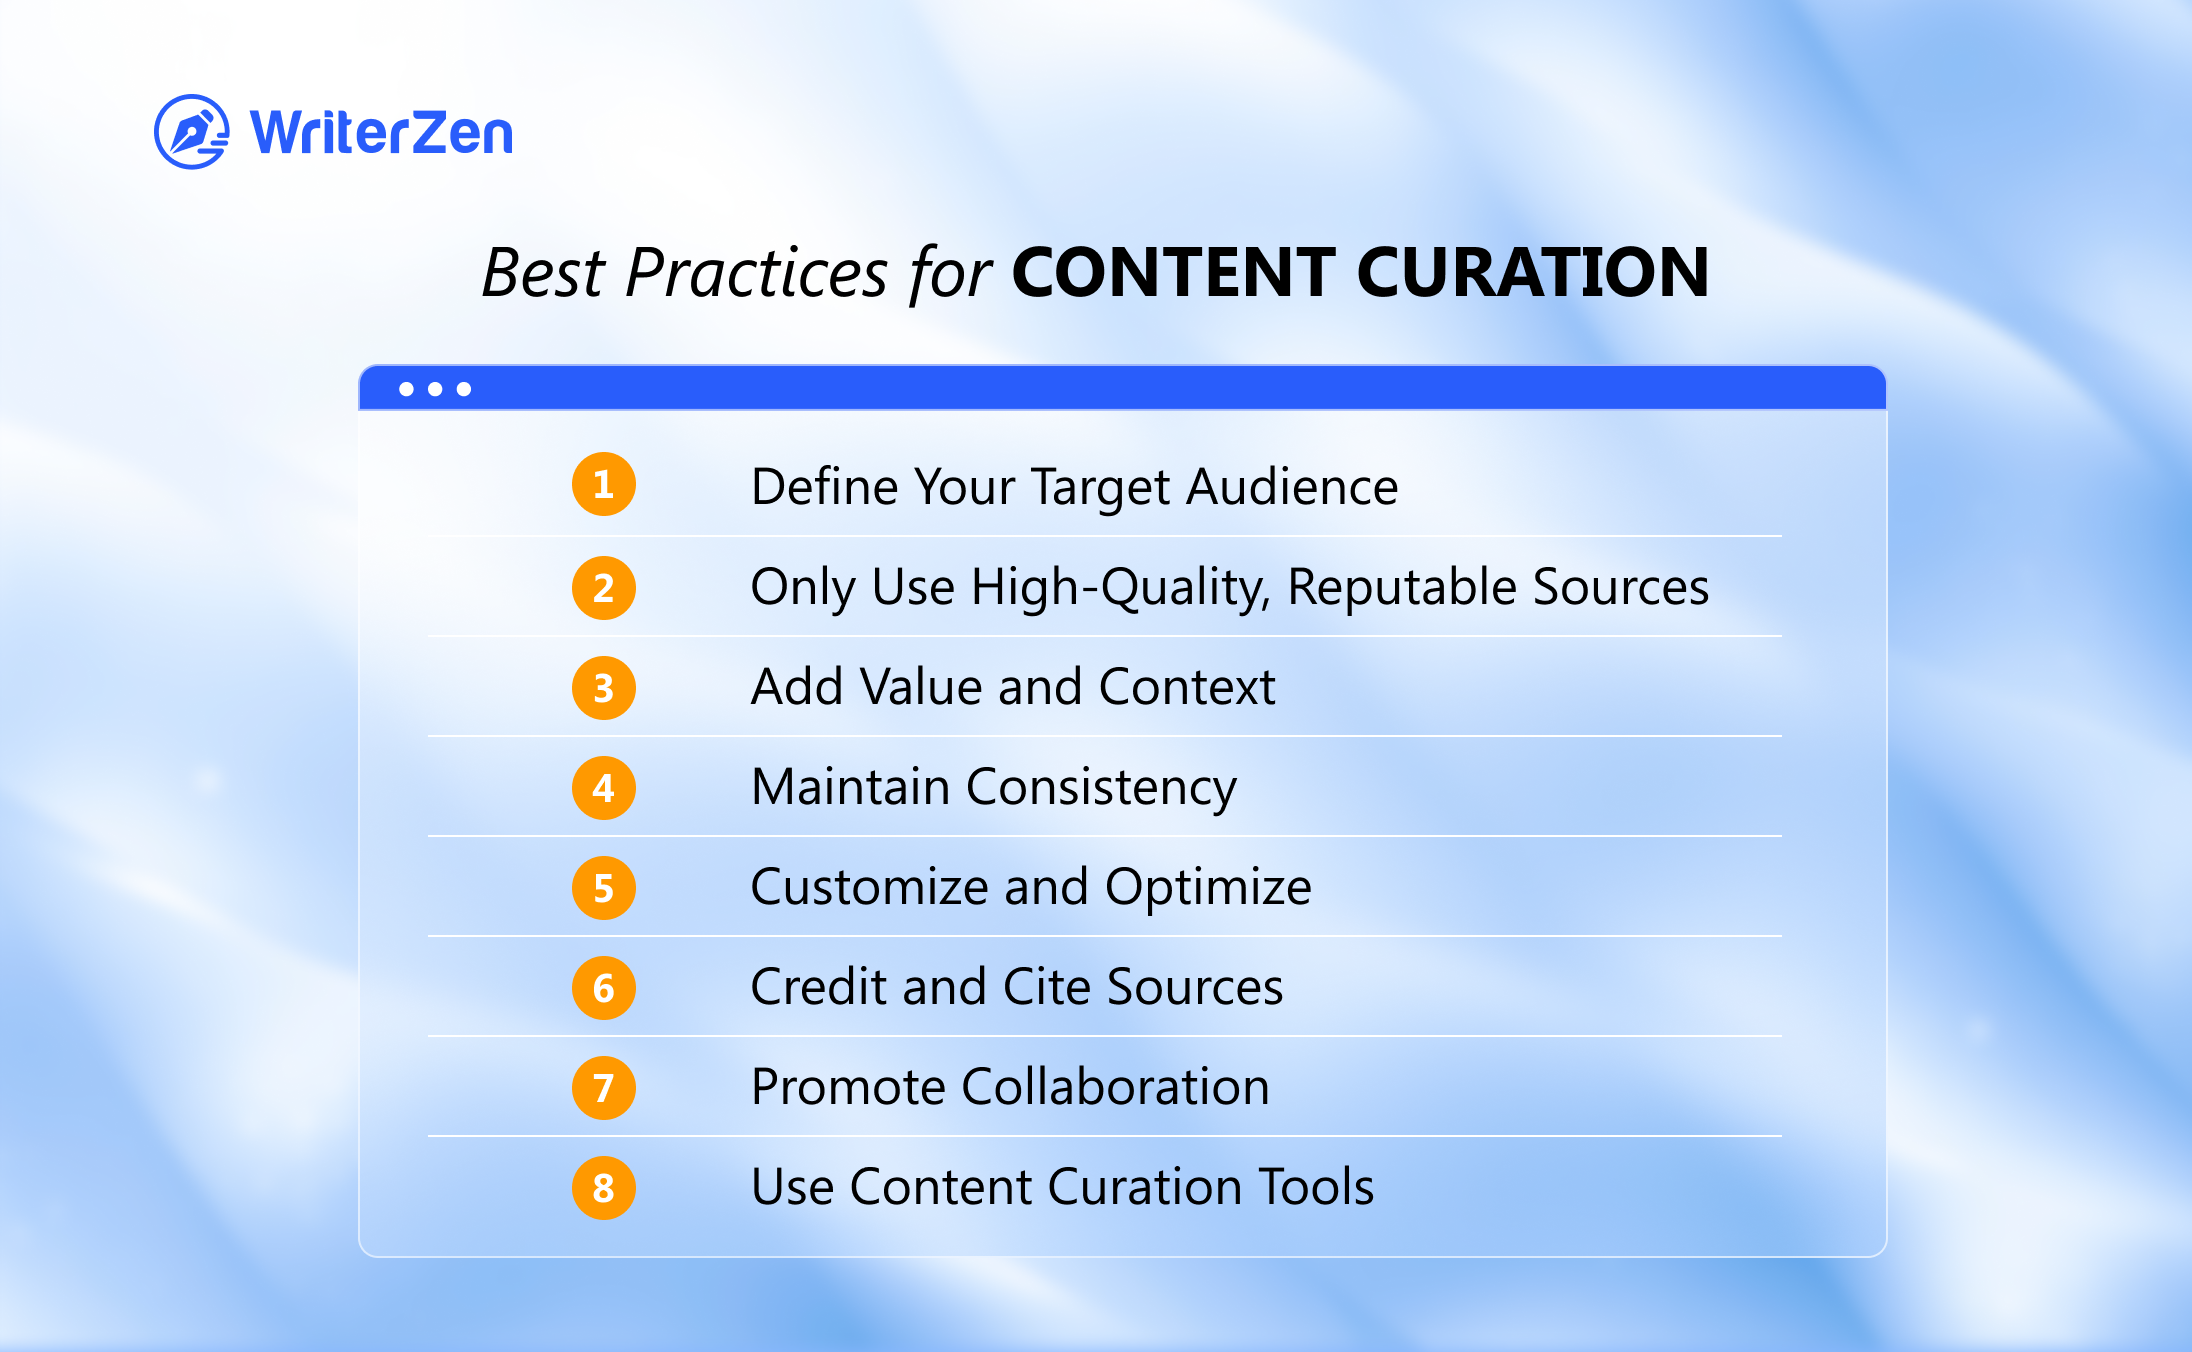 Best Practices for Content Curation